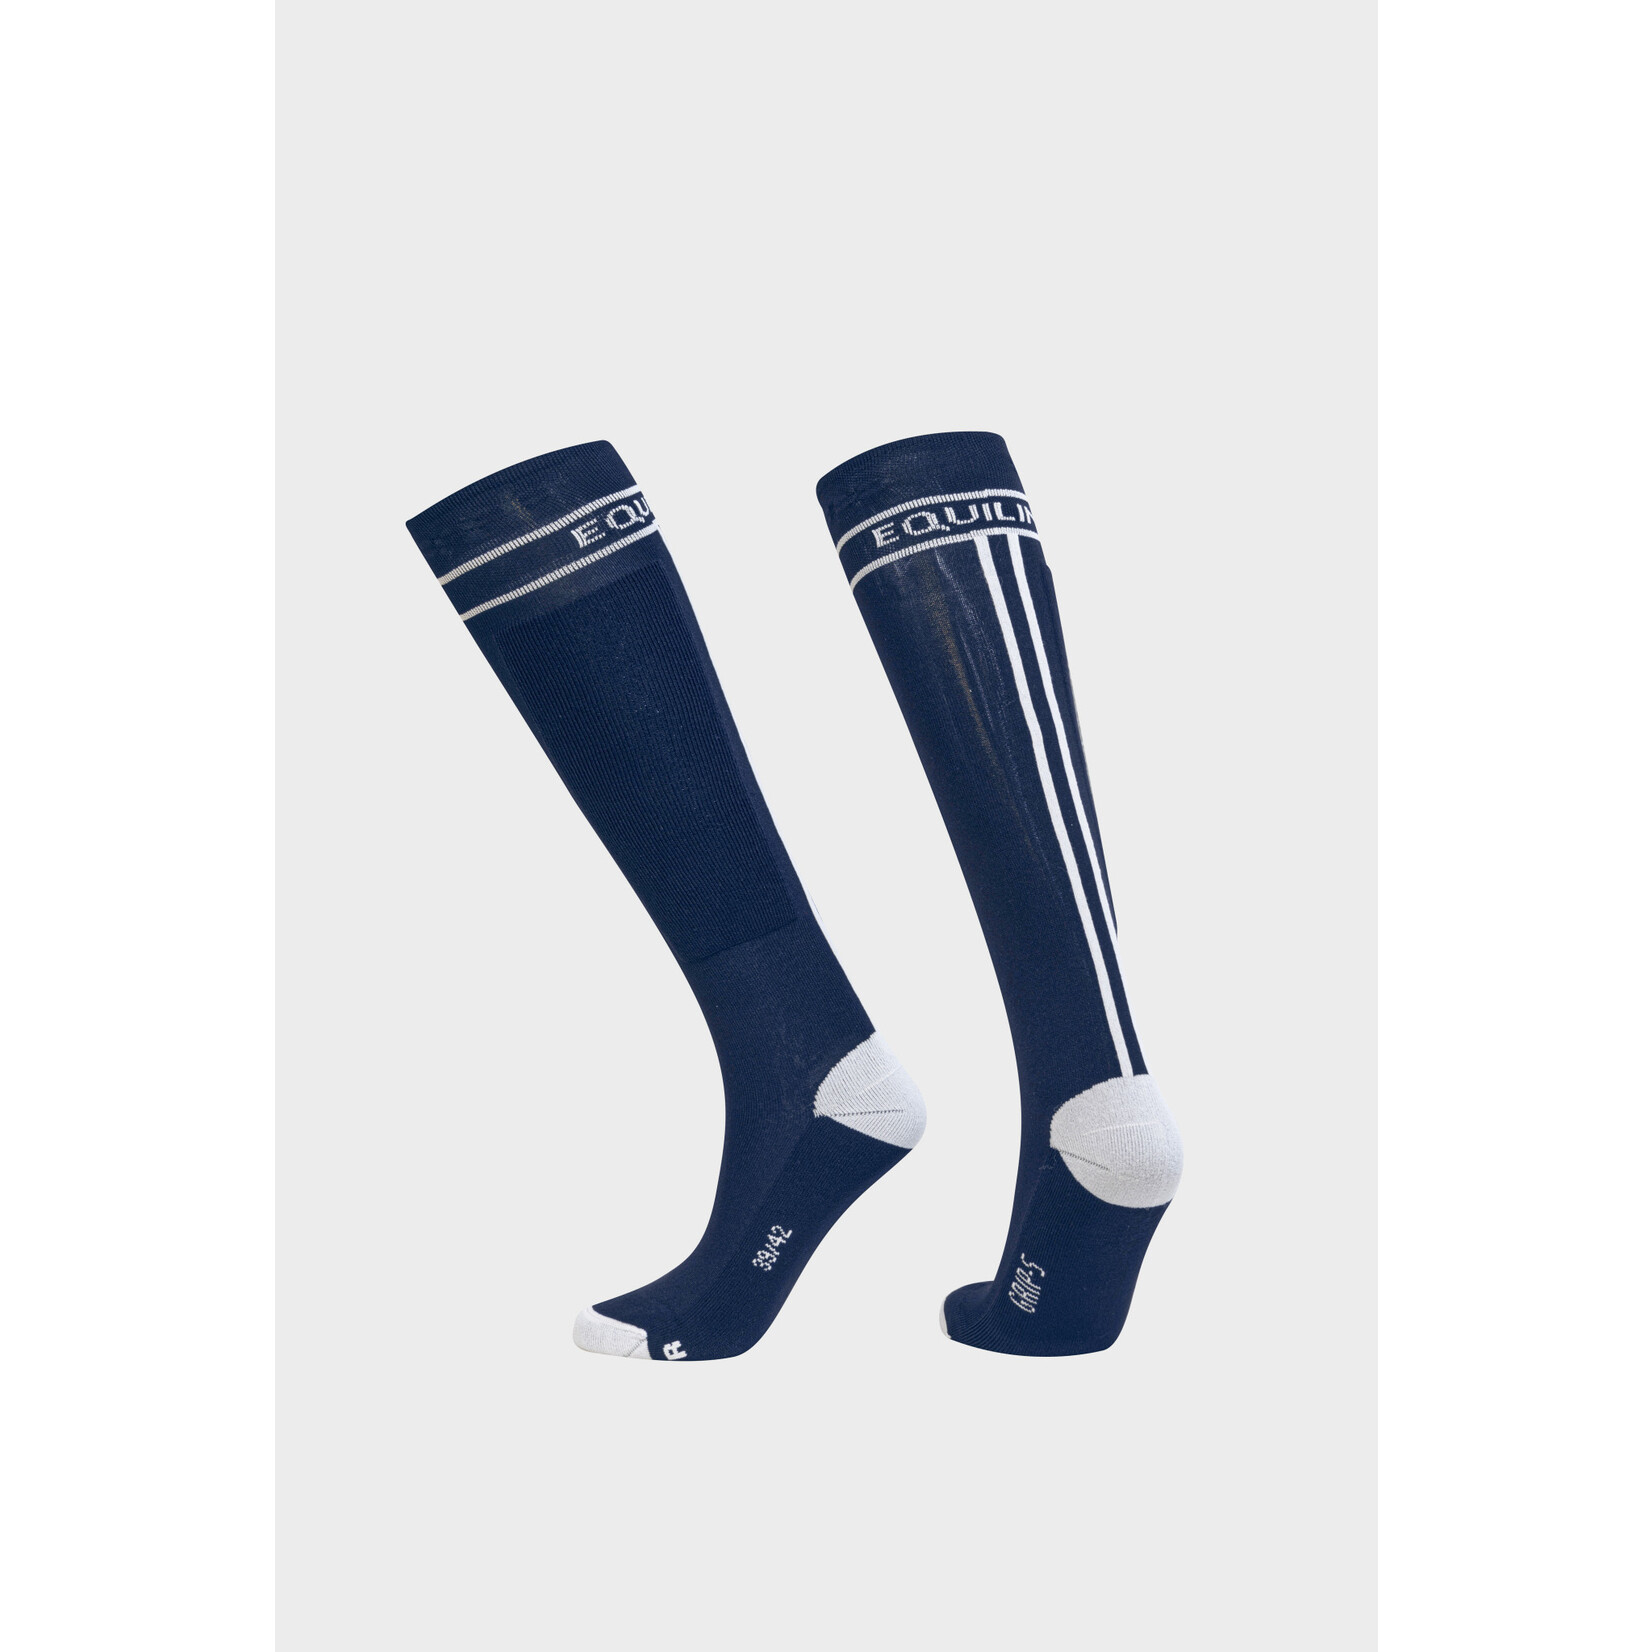 Equiline Equiline Cirec Riding Socks